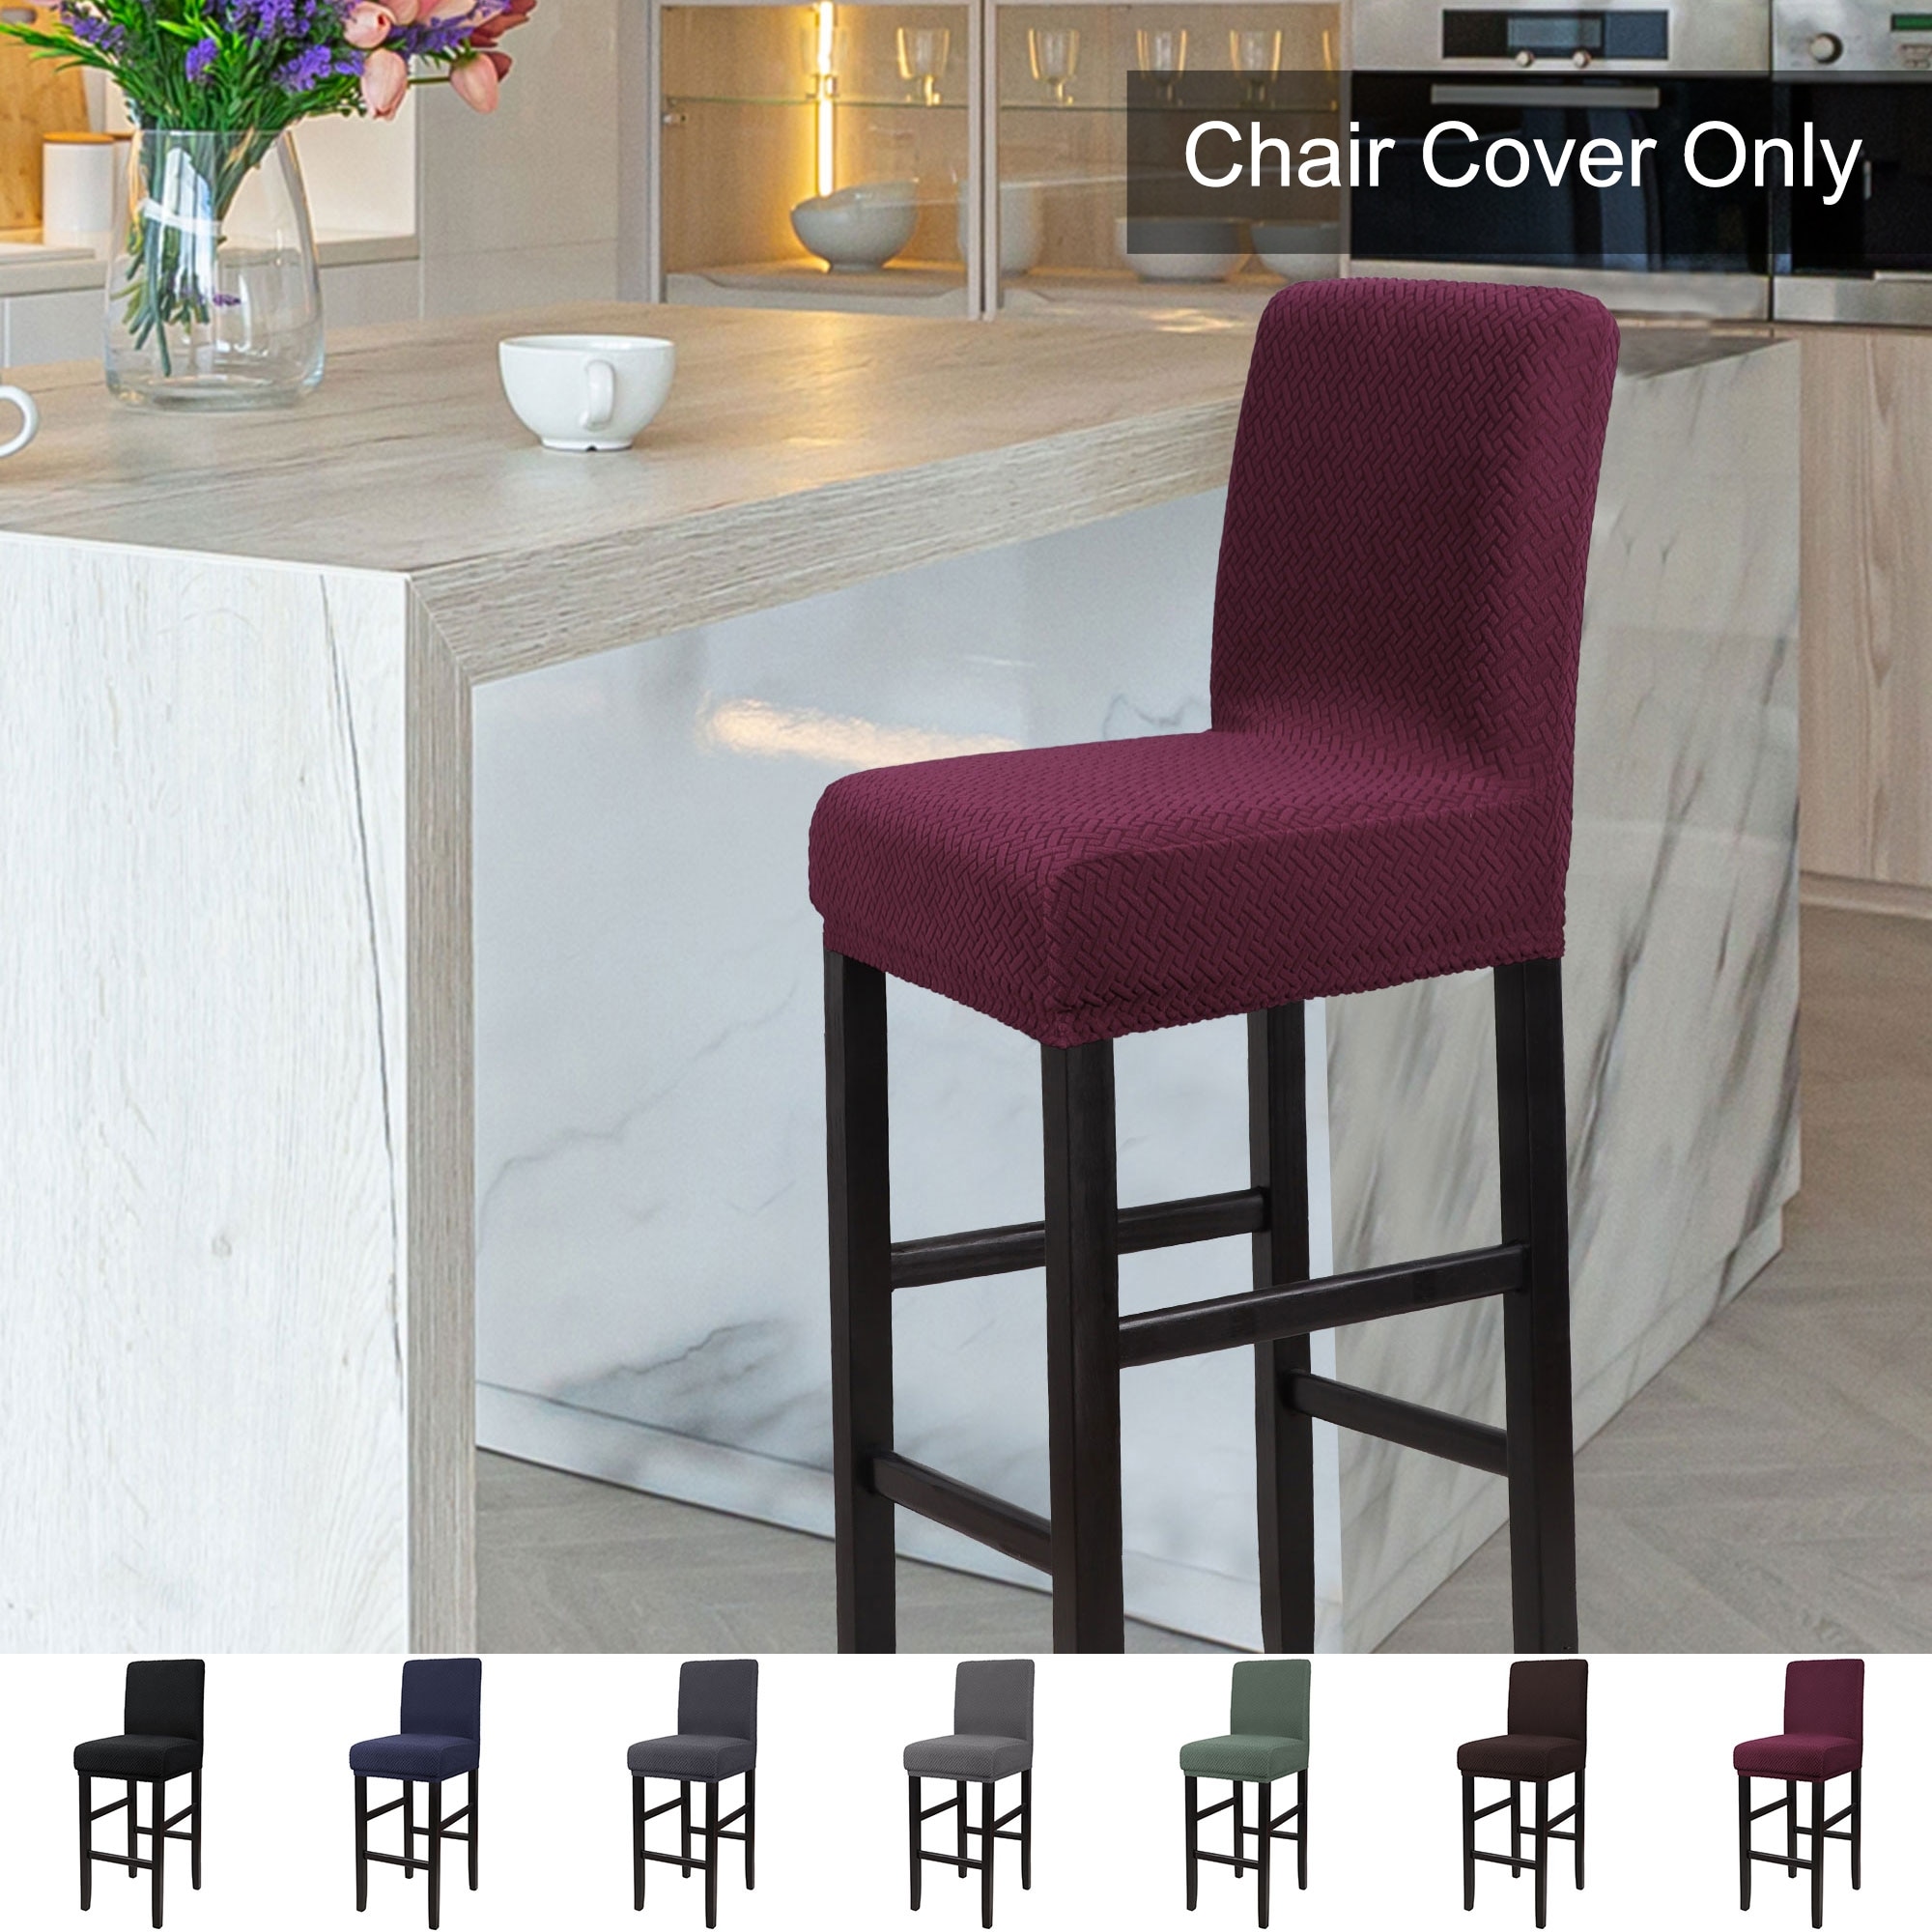 Stretch Bar Stool Low Back Short Chair Seat Cover Slipcover Hot Sale Durable New 